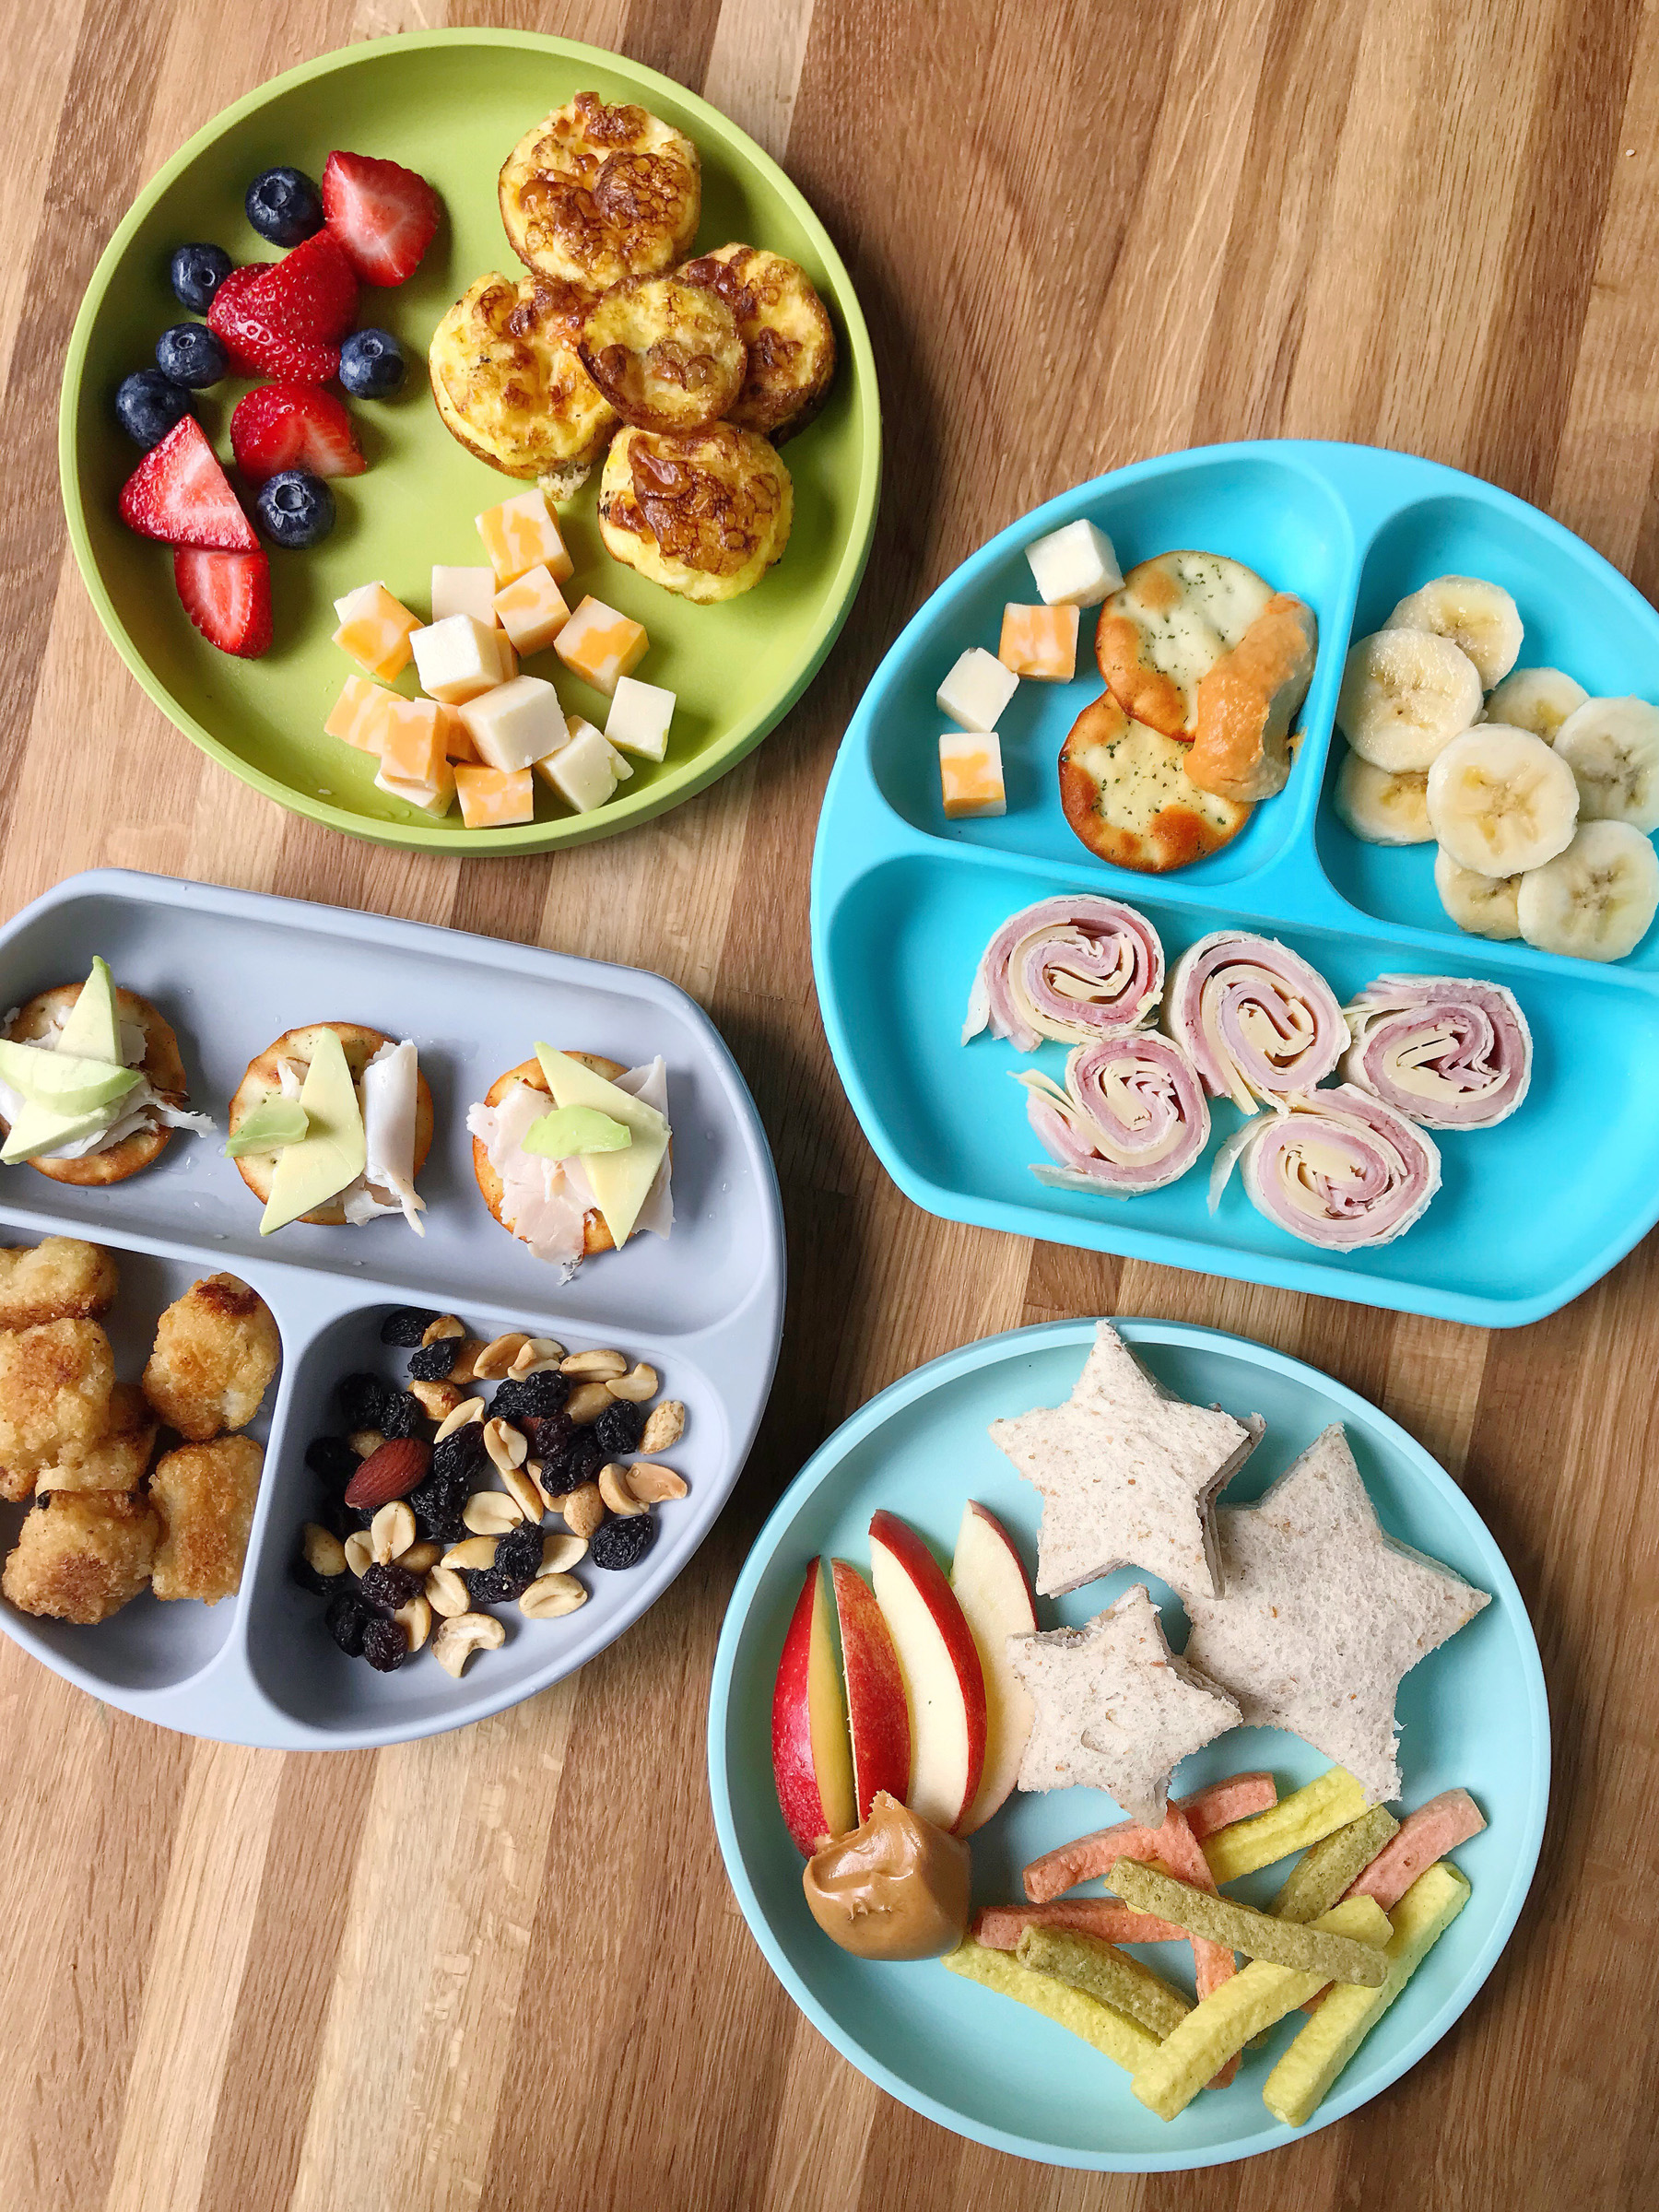 Kid-Friendly Snack Plate Lunches. - DomestikatedLife